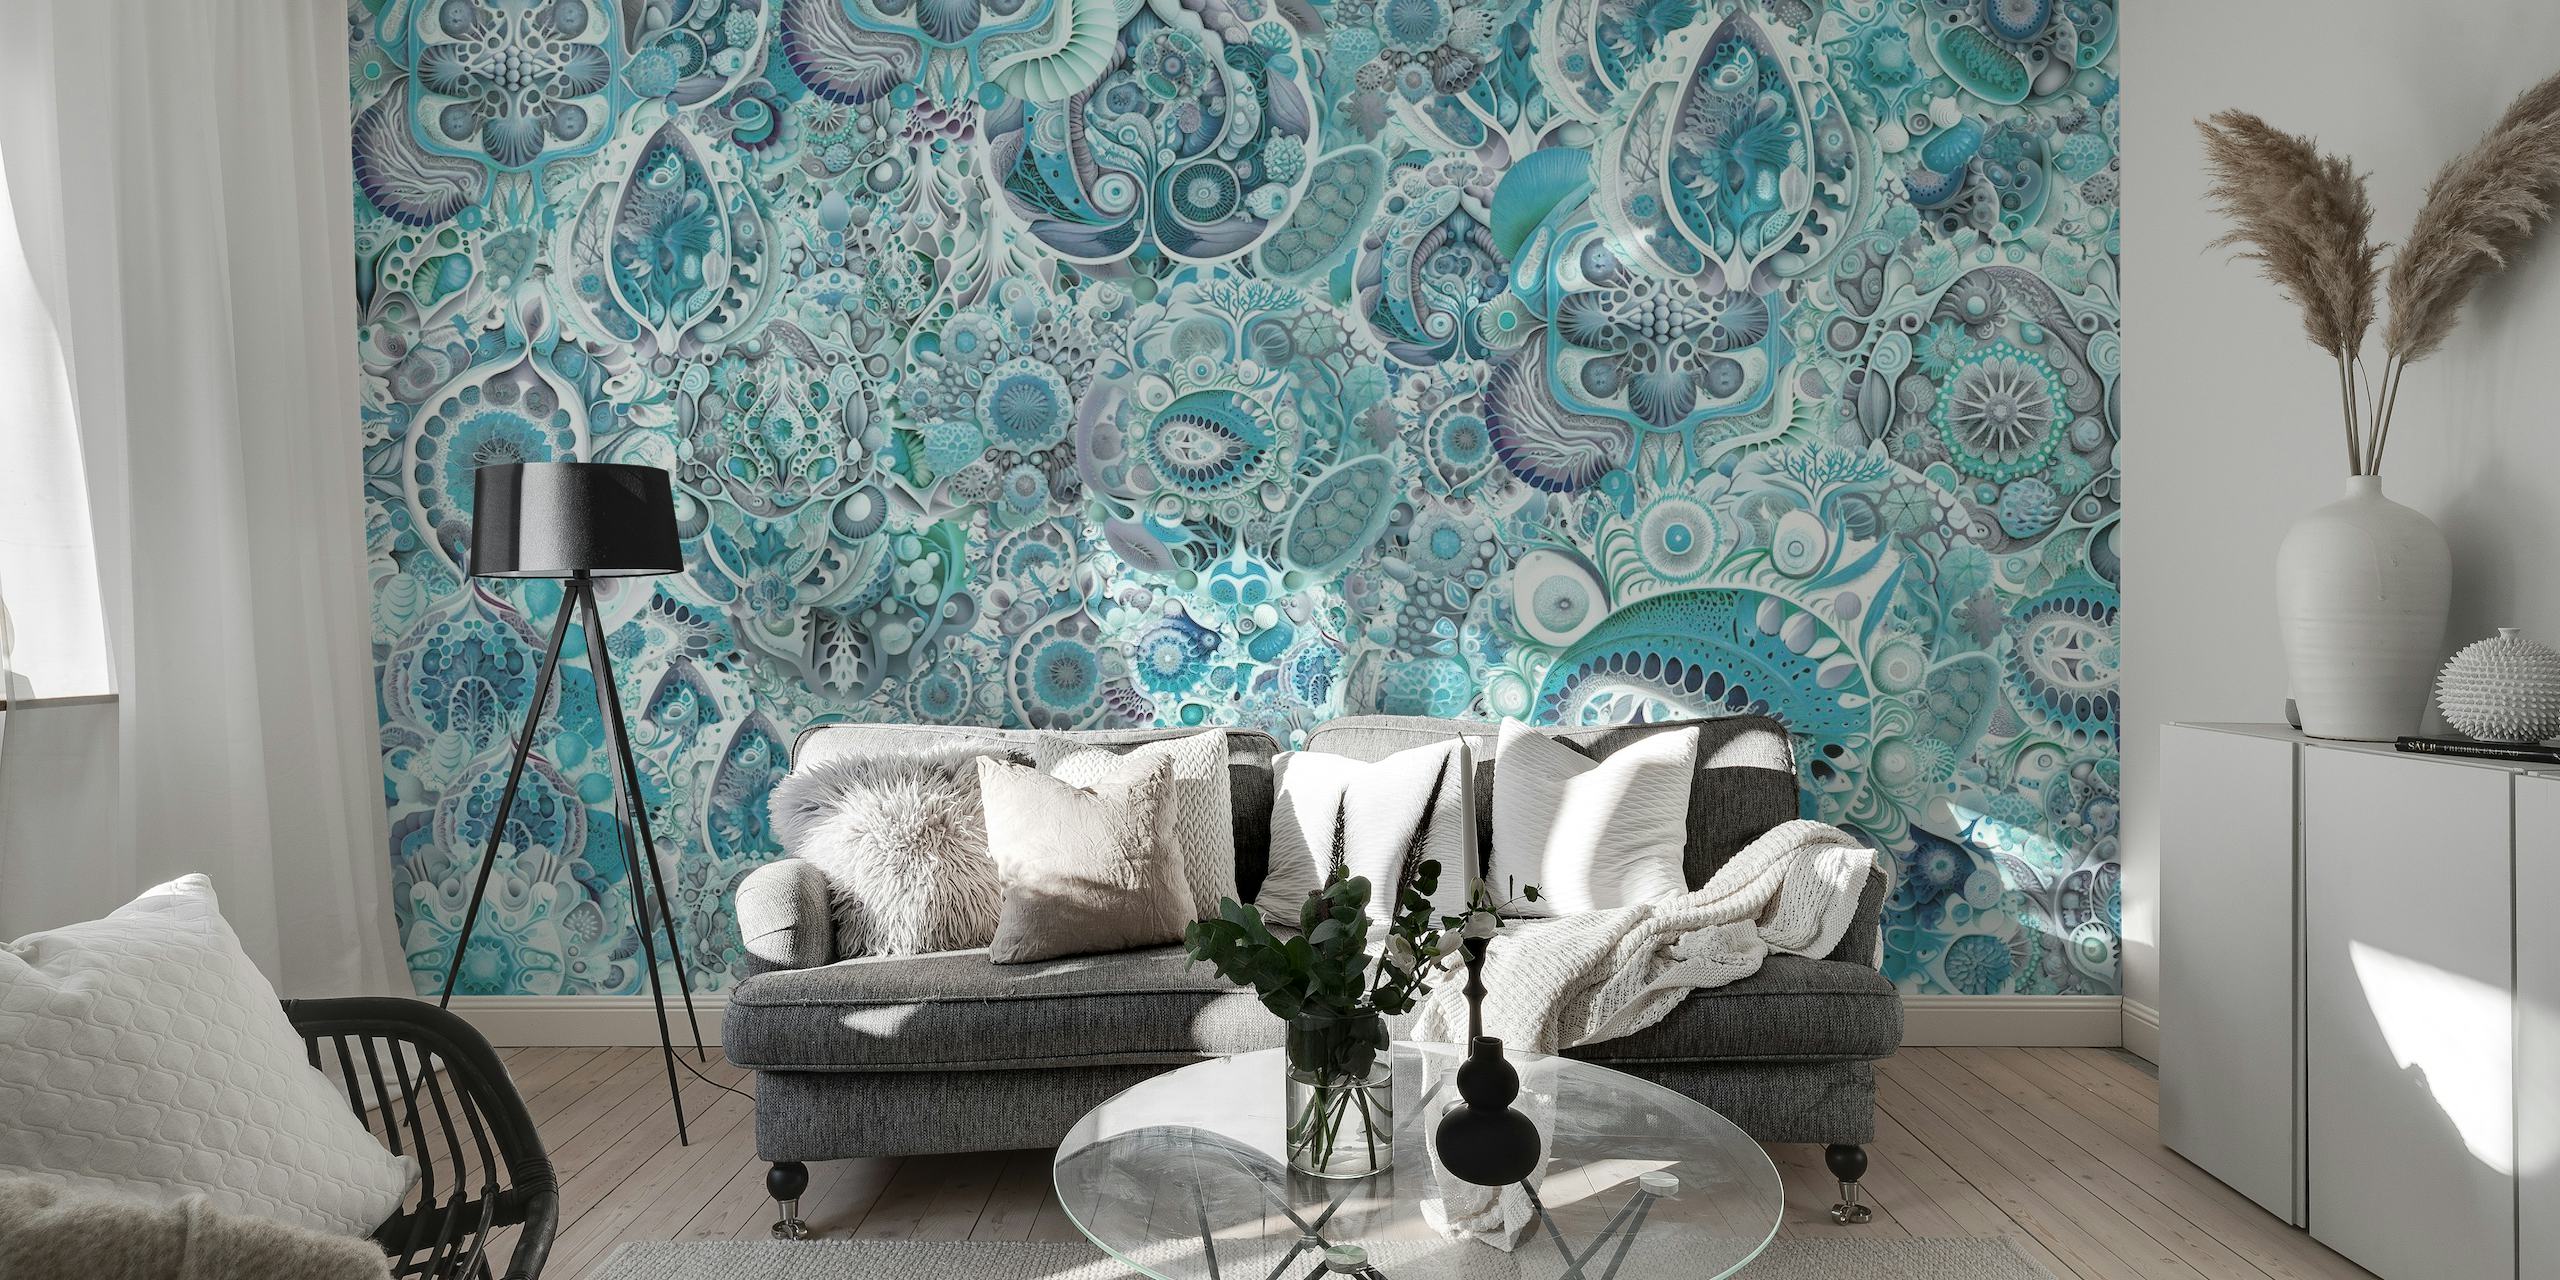 After Haeckel Blue wall mural featuring intricate marine life and floral patterns in blue tones.